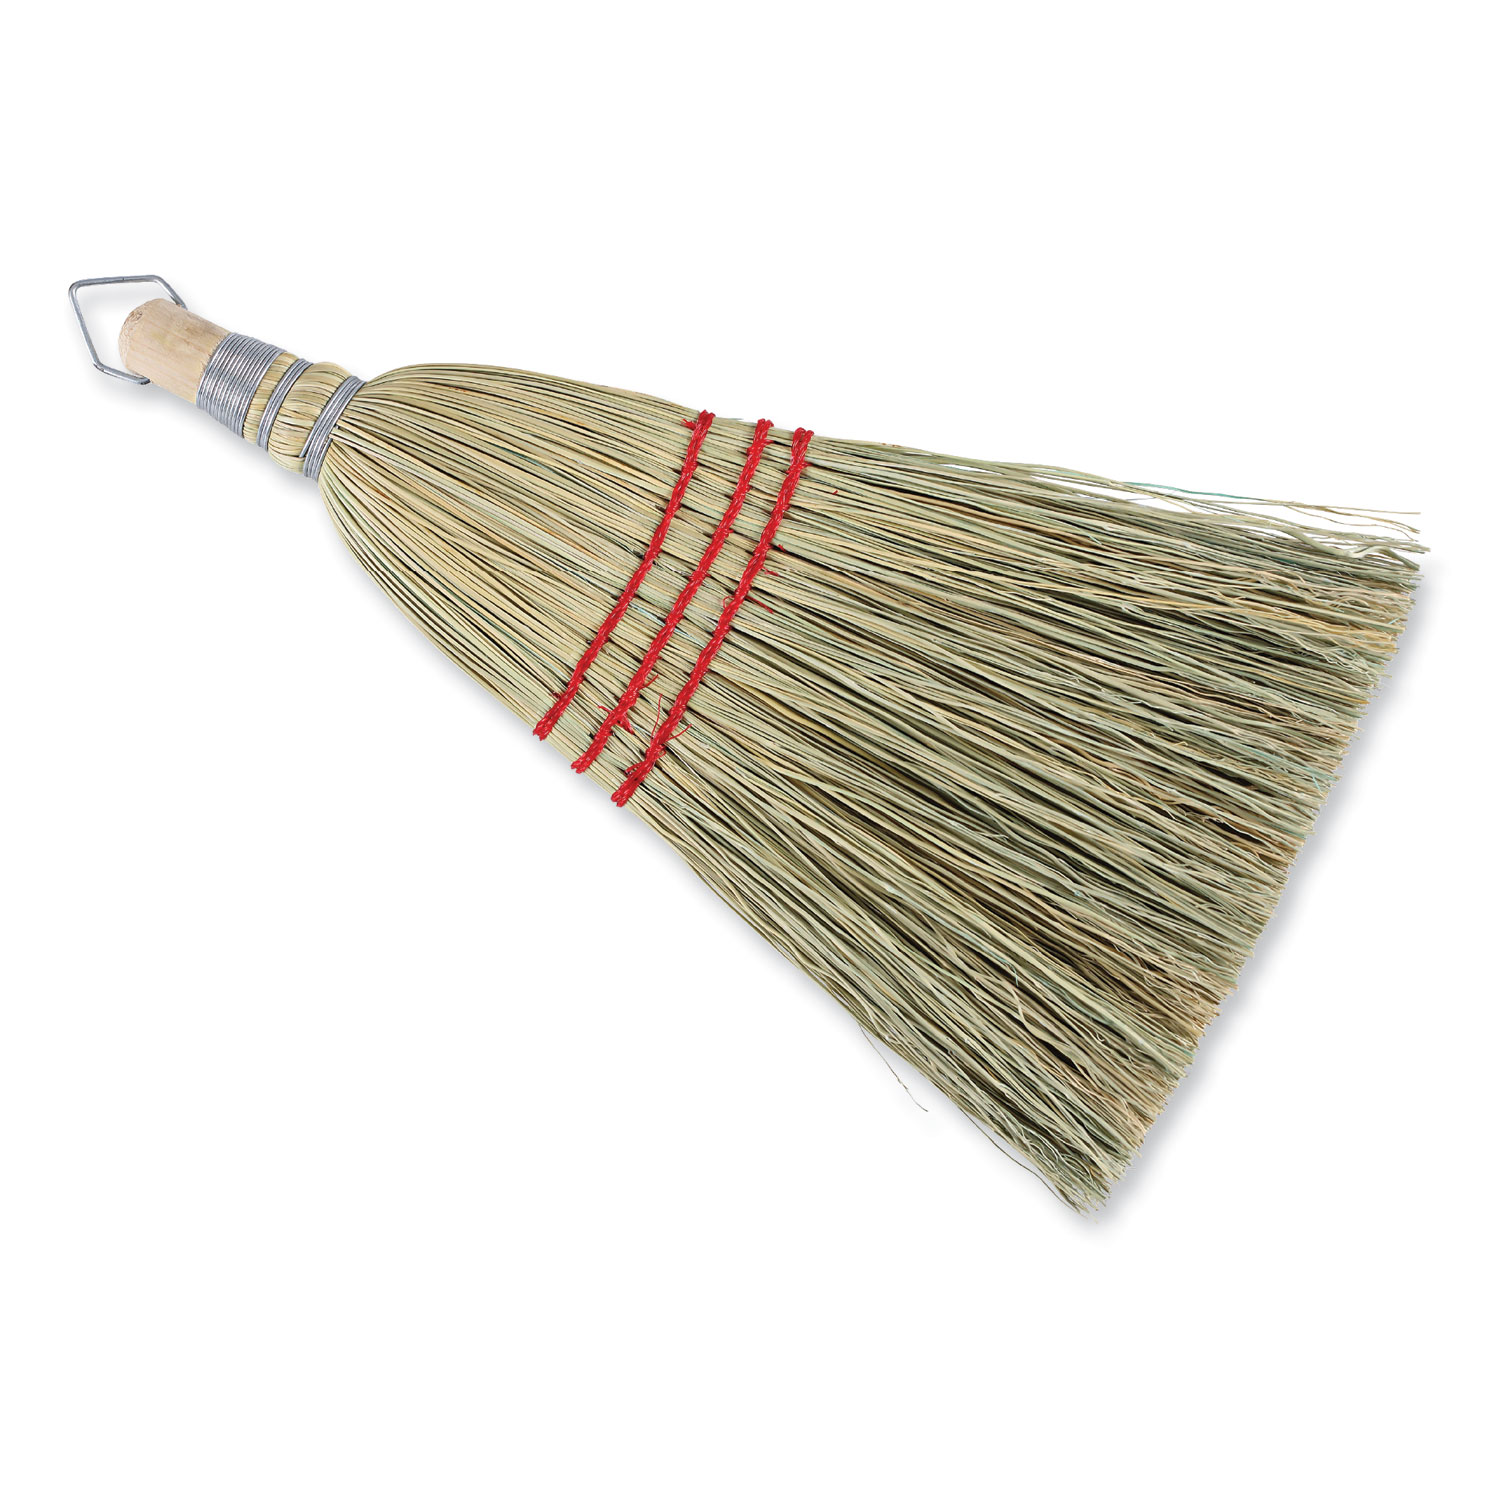 Rubbermaid Commercial Products Heavy-Duty Dustpan, Charcoal Color &  Commercial 12 Inch Corn Whisk Broom, Yellow, Flagged Natural Bristles